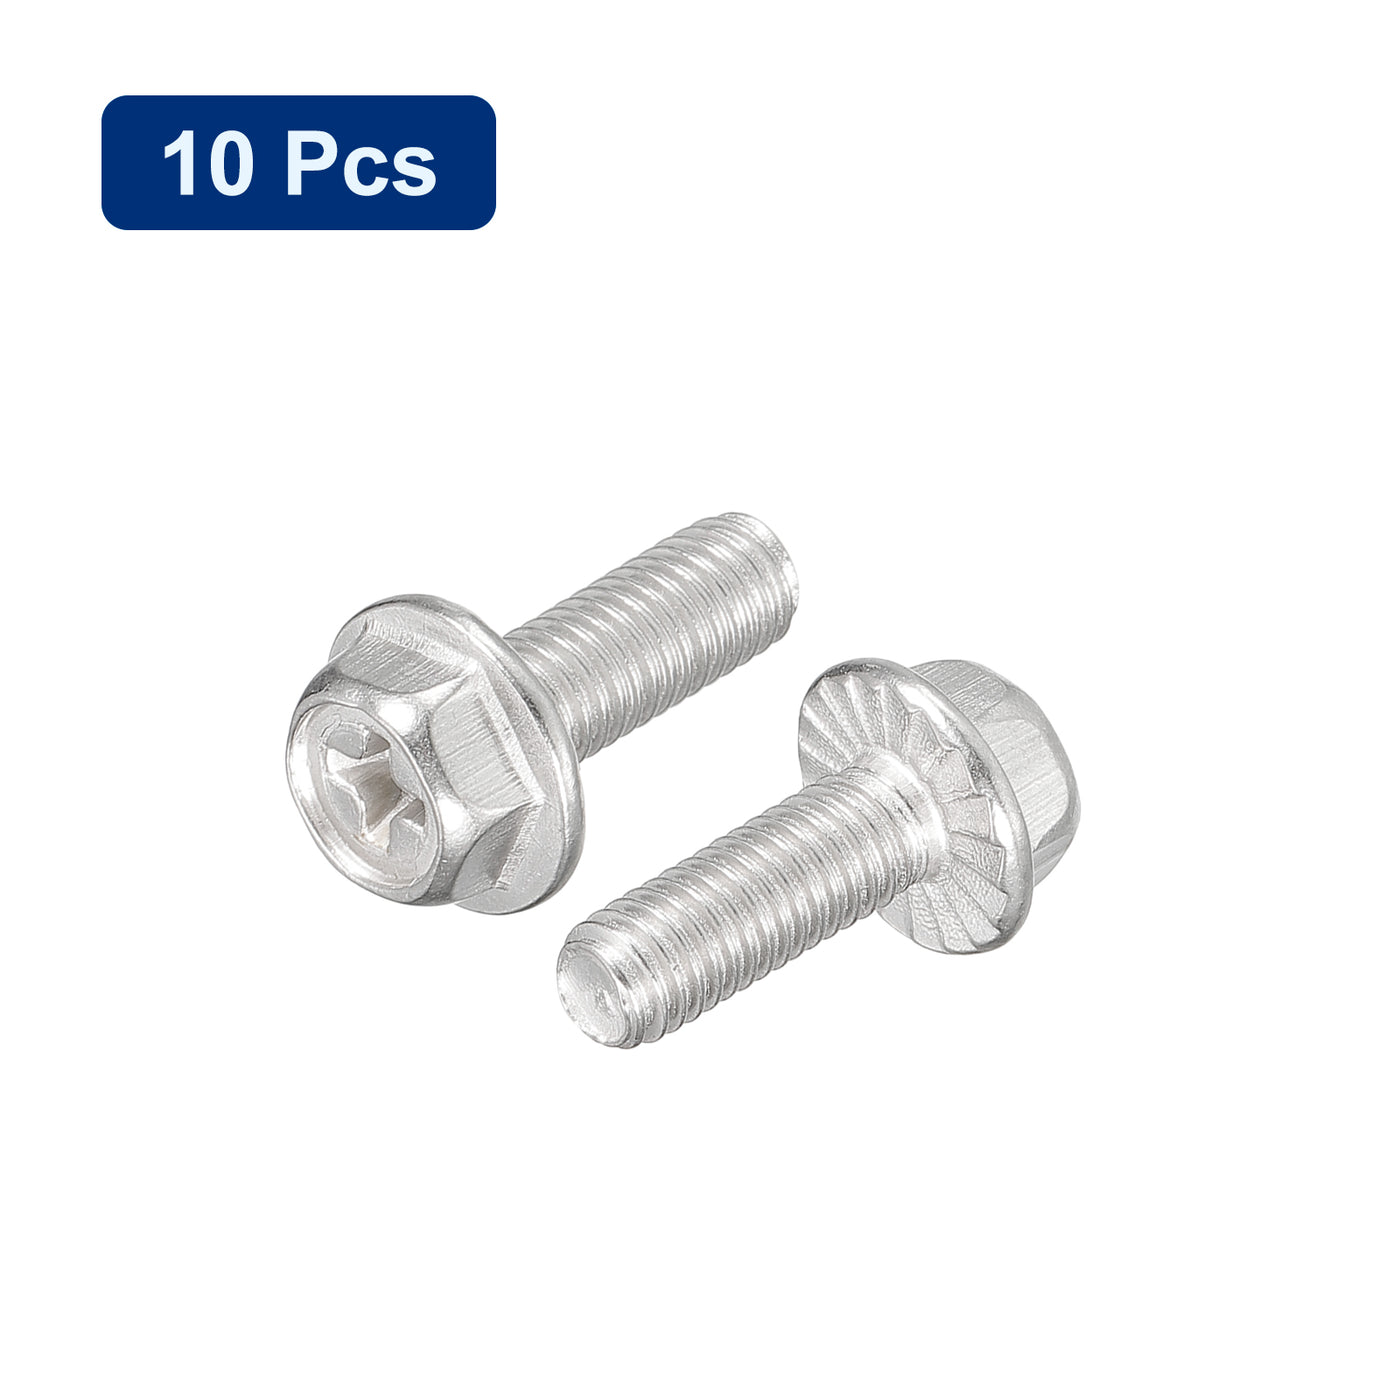 uxcell Uxcell M5x14mm Phillips Hex Head Flange Bolts, 10pcs 304 Stainless Steel Screws